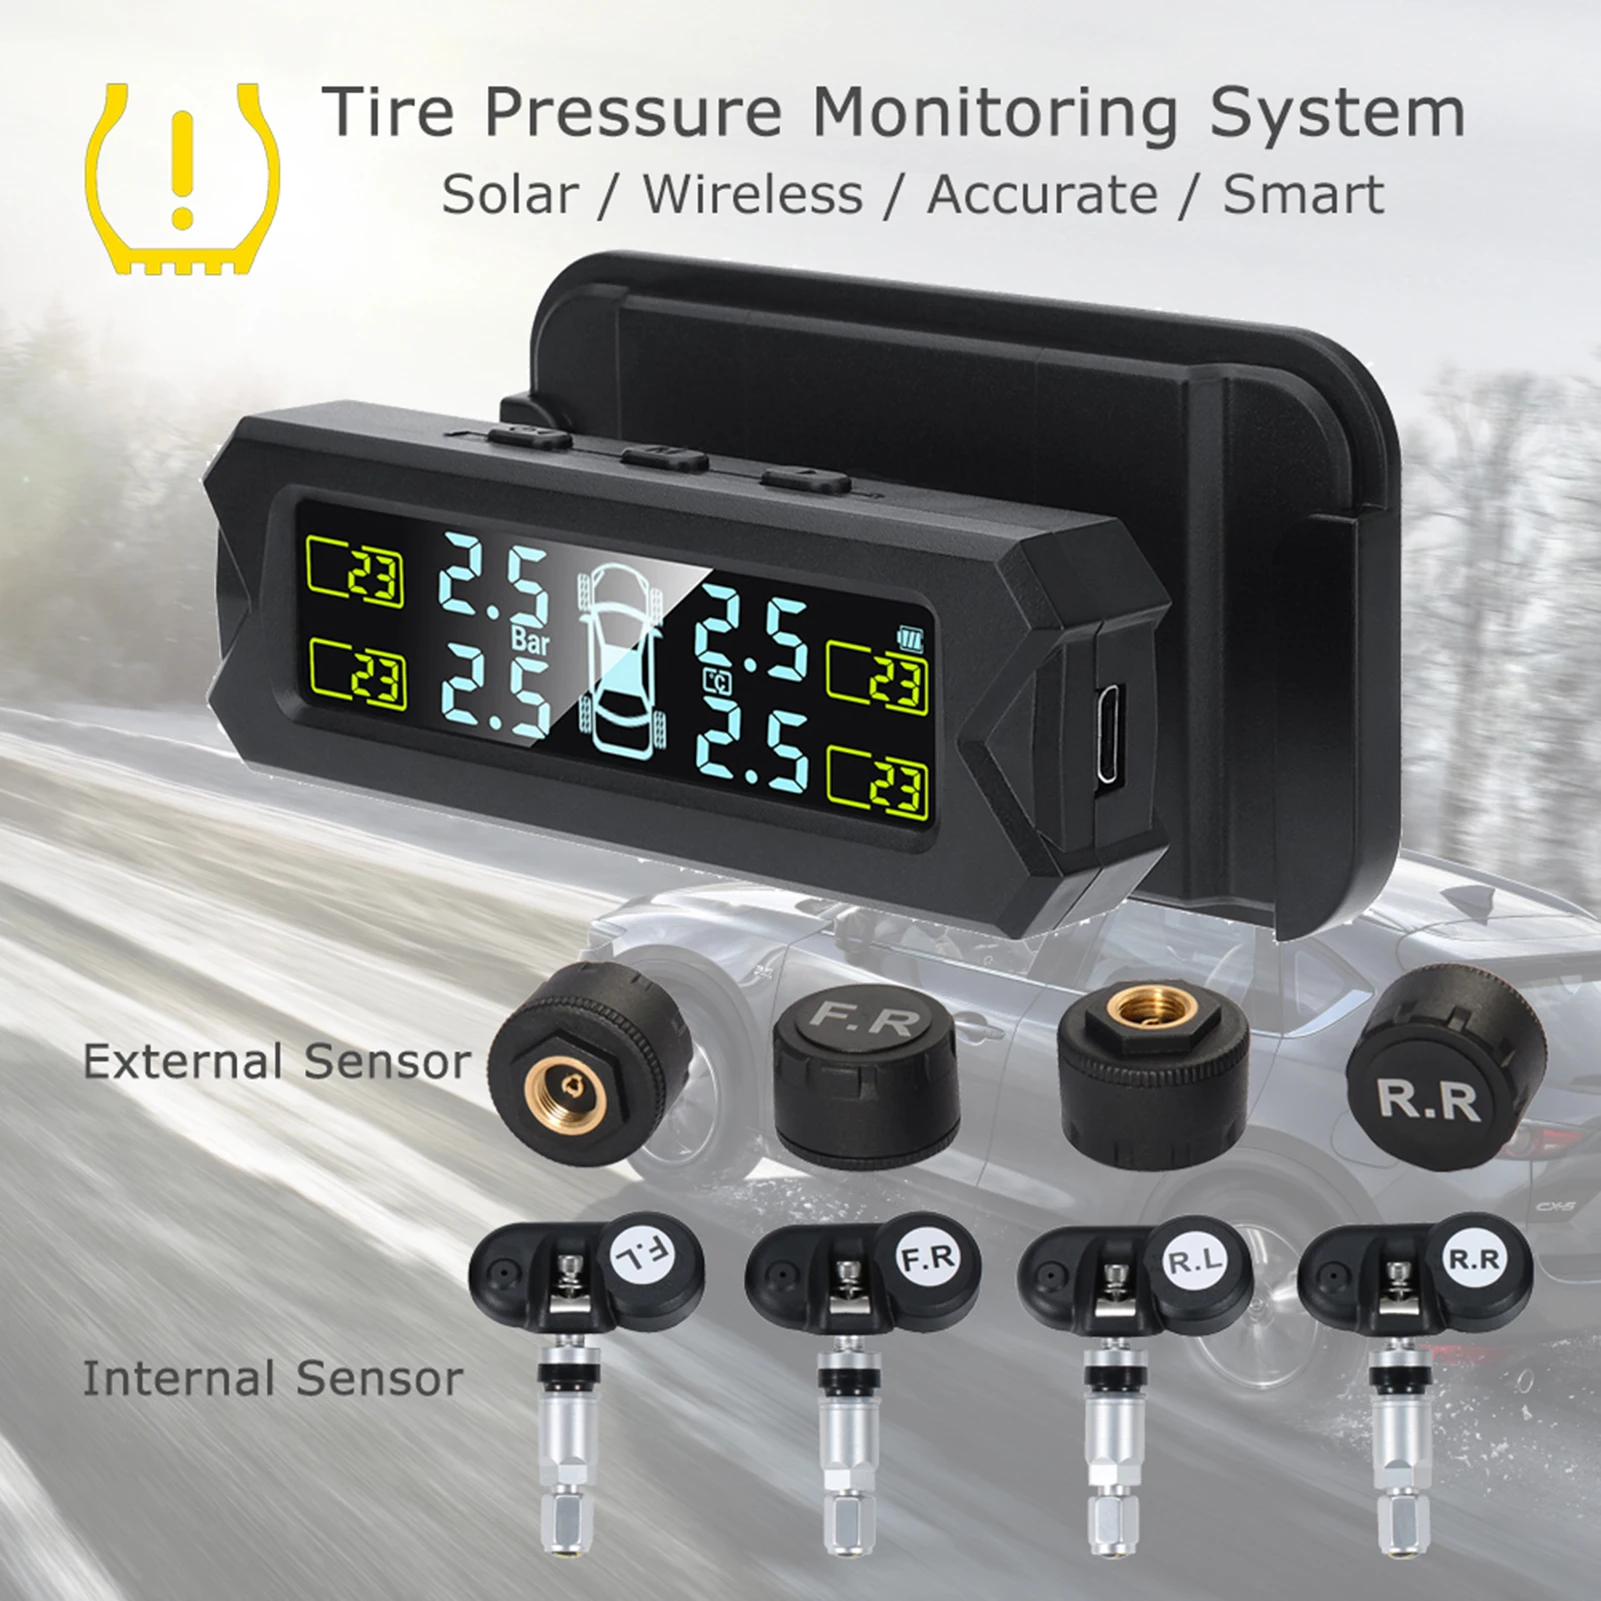 

Tire Pressure Monitoring System,Wireless Solar Power TPMS with 5 Alarm Modes,Auto Backlight LCD Display,4 Sensors 0-67 PSI